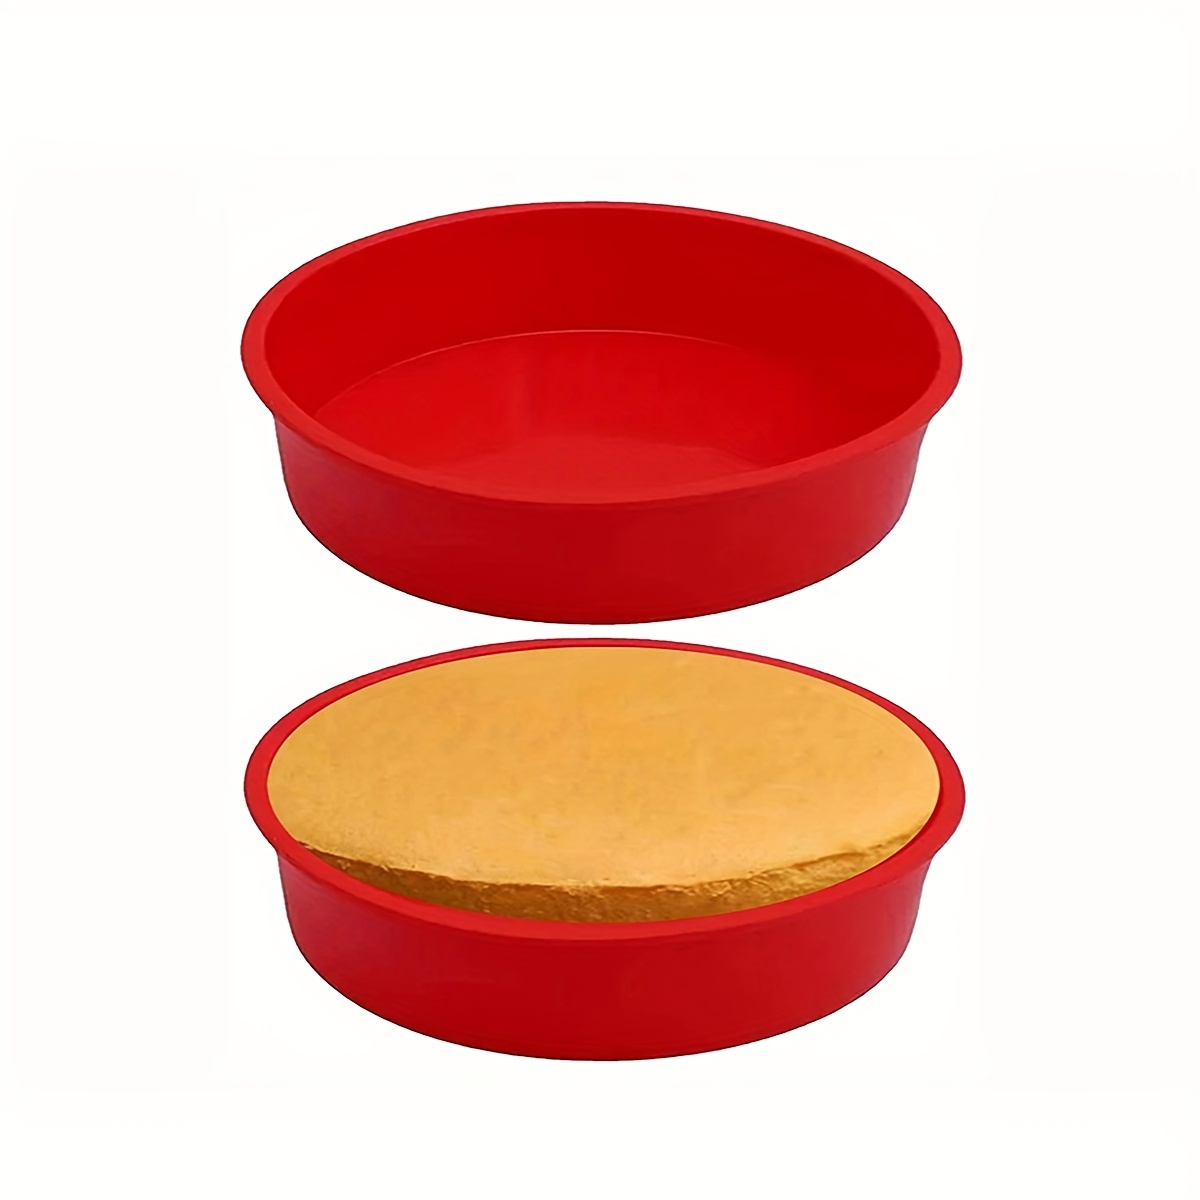 SILIVO 6 inch Round Cake Pans - Set of 4 - Silicone Molds for Baking, Nonstick